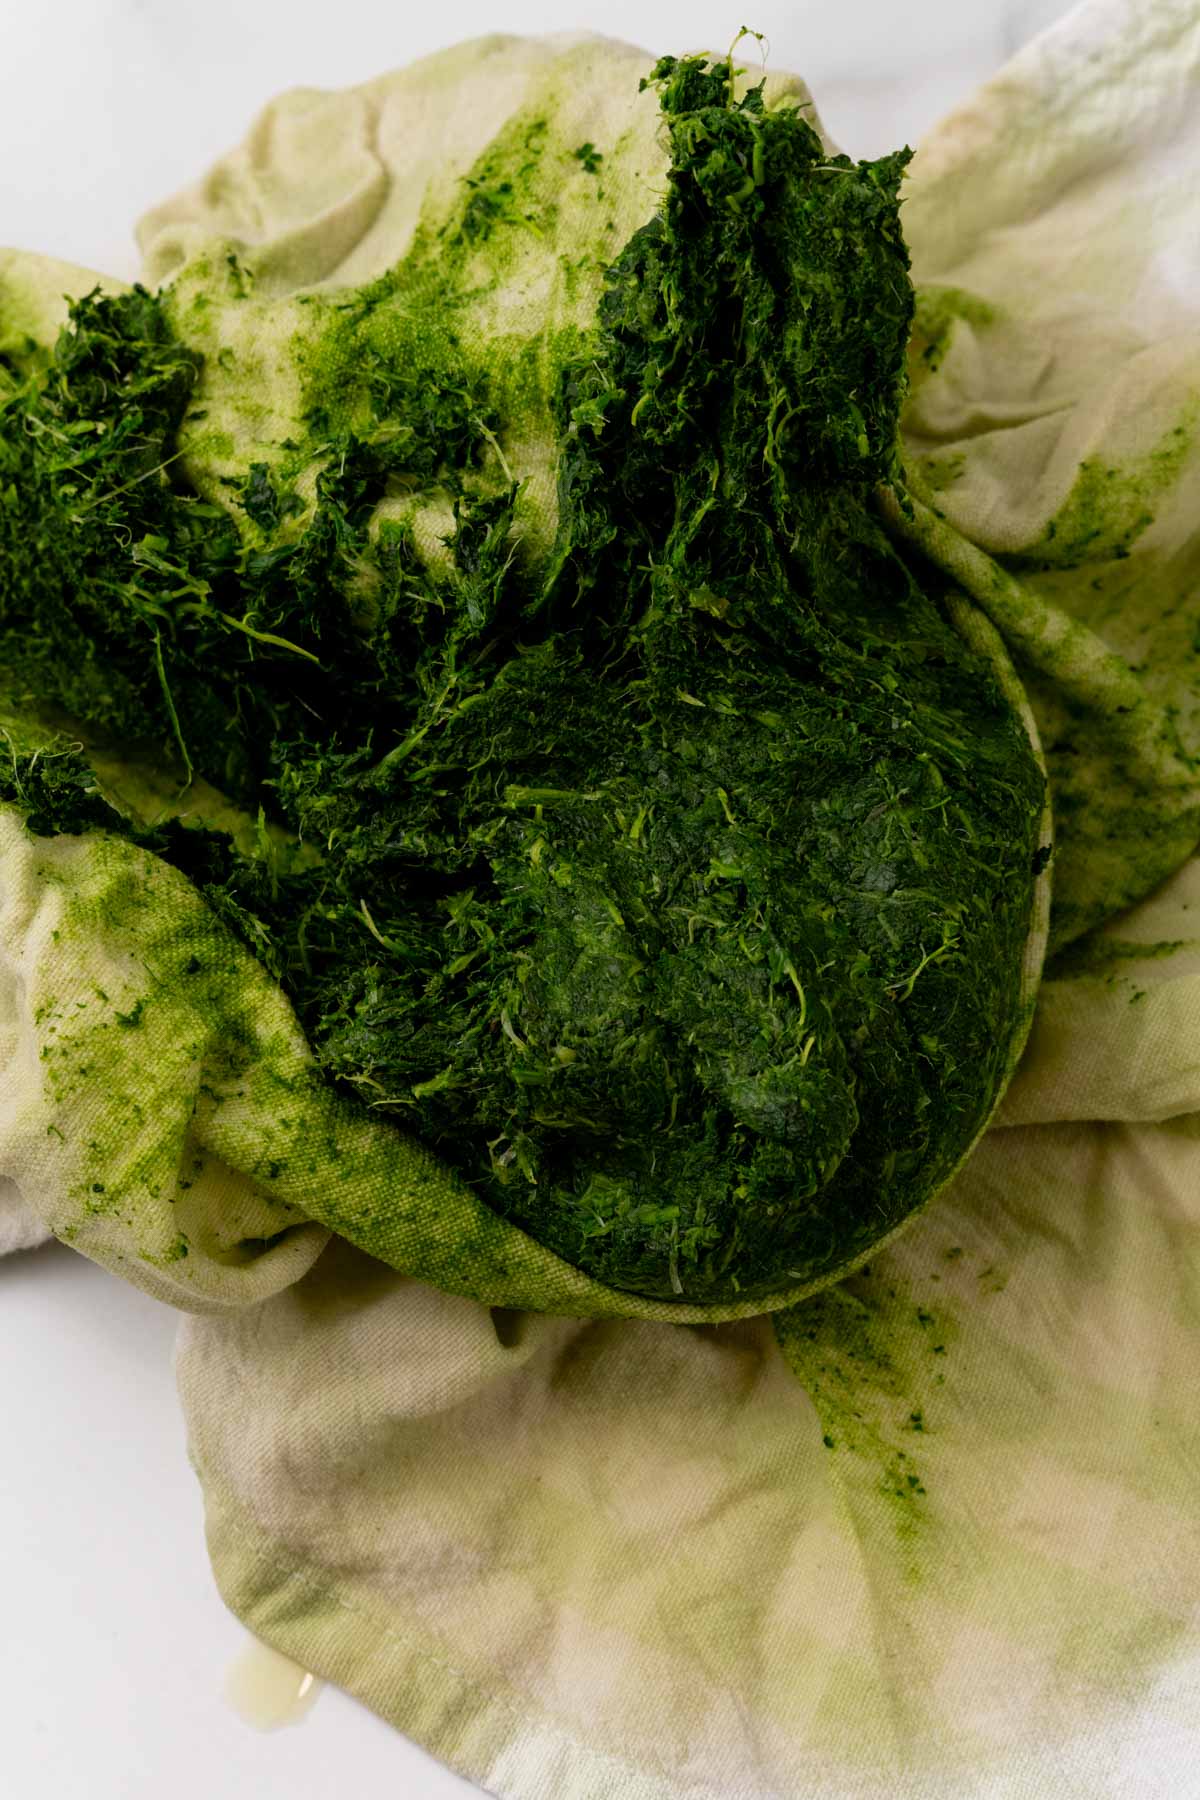 Spinach being squeezed in a cloth napkin